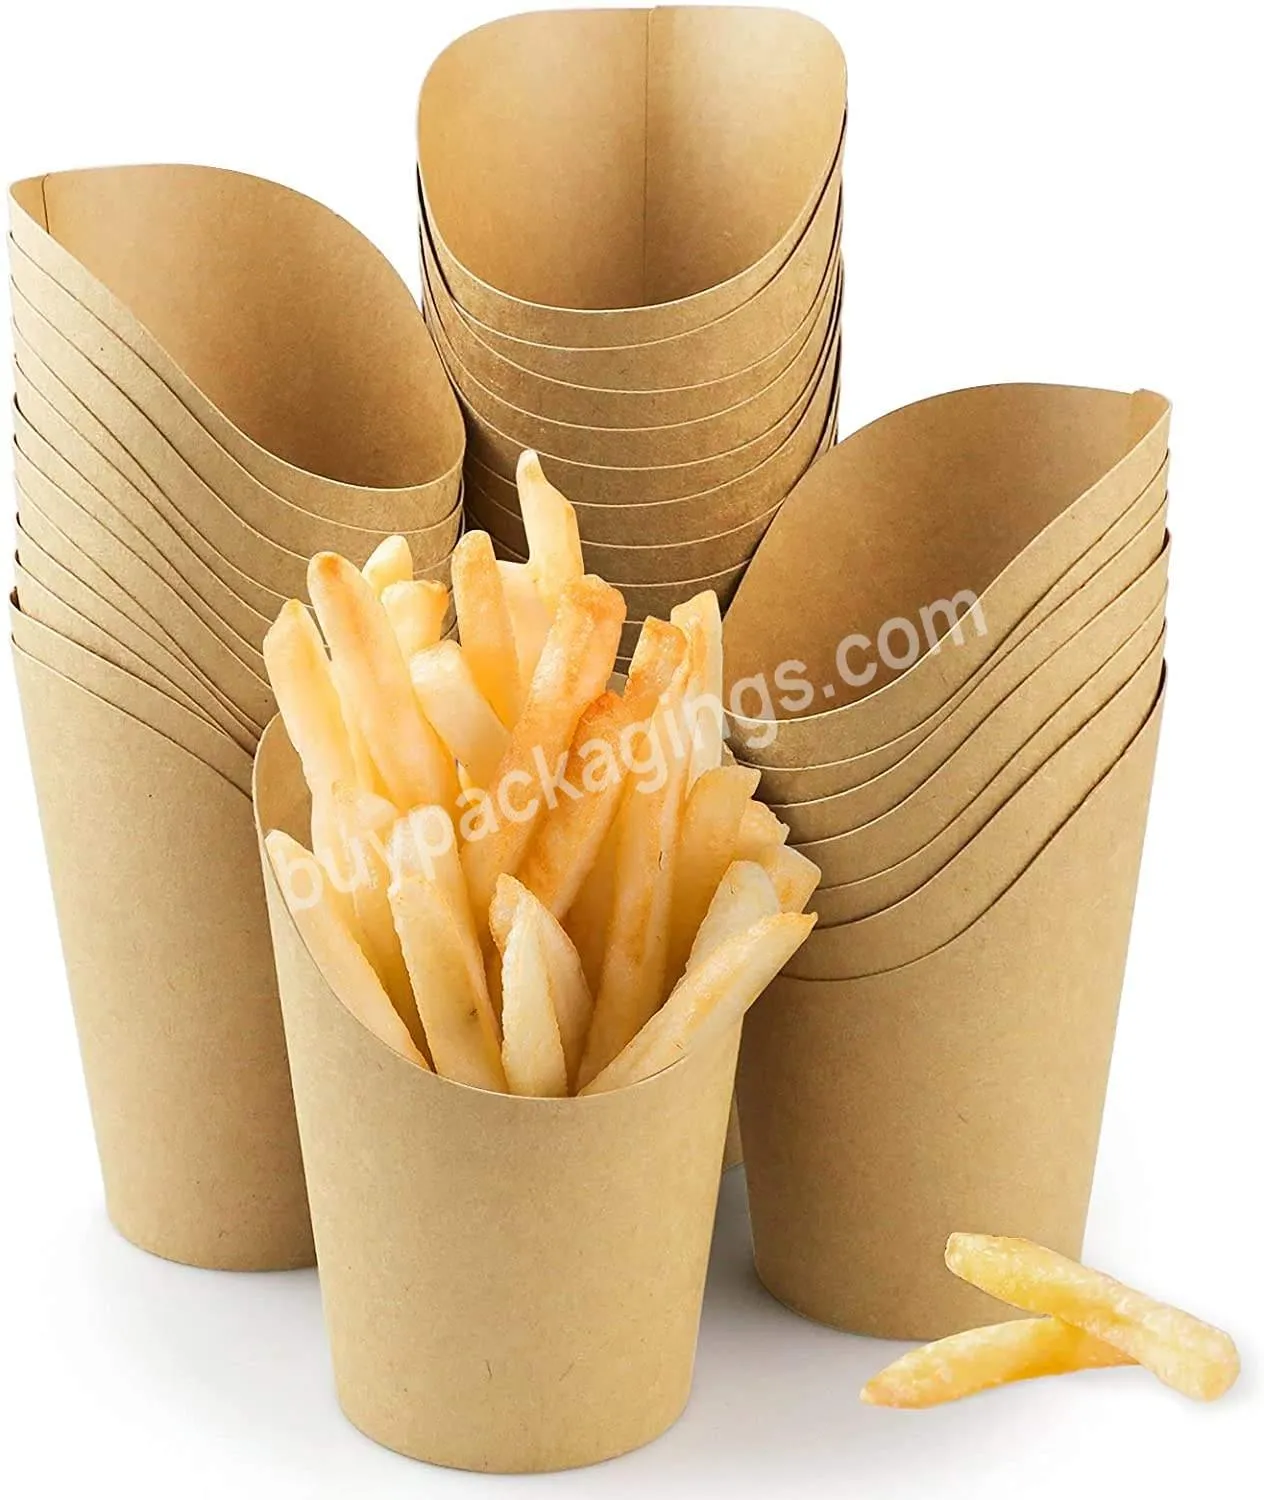 Wholesale Price Potato Chip Paper Cup Eco Friendly Biodegradable Paper Chip Cup - Buy Chips Paper Cup,Potato Chip Paper Cup,Paper Chip Cup.